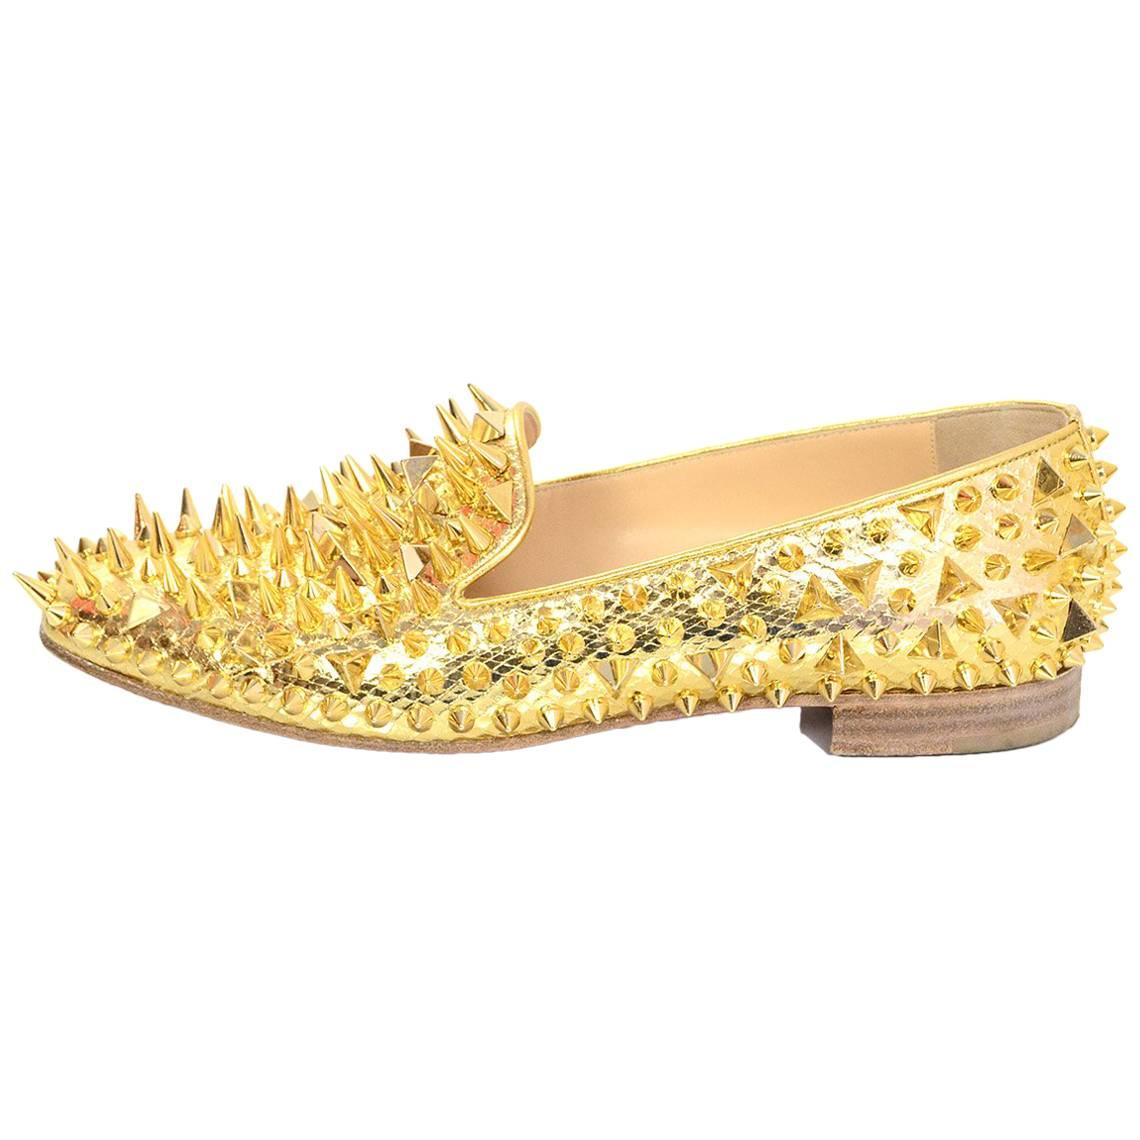 Christian Louboutin Gold Spiked Loafers Sz 38.5